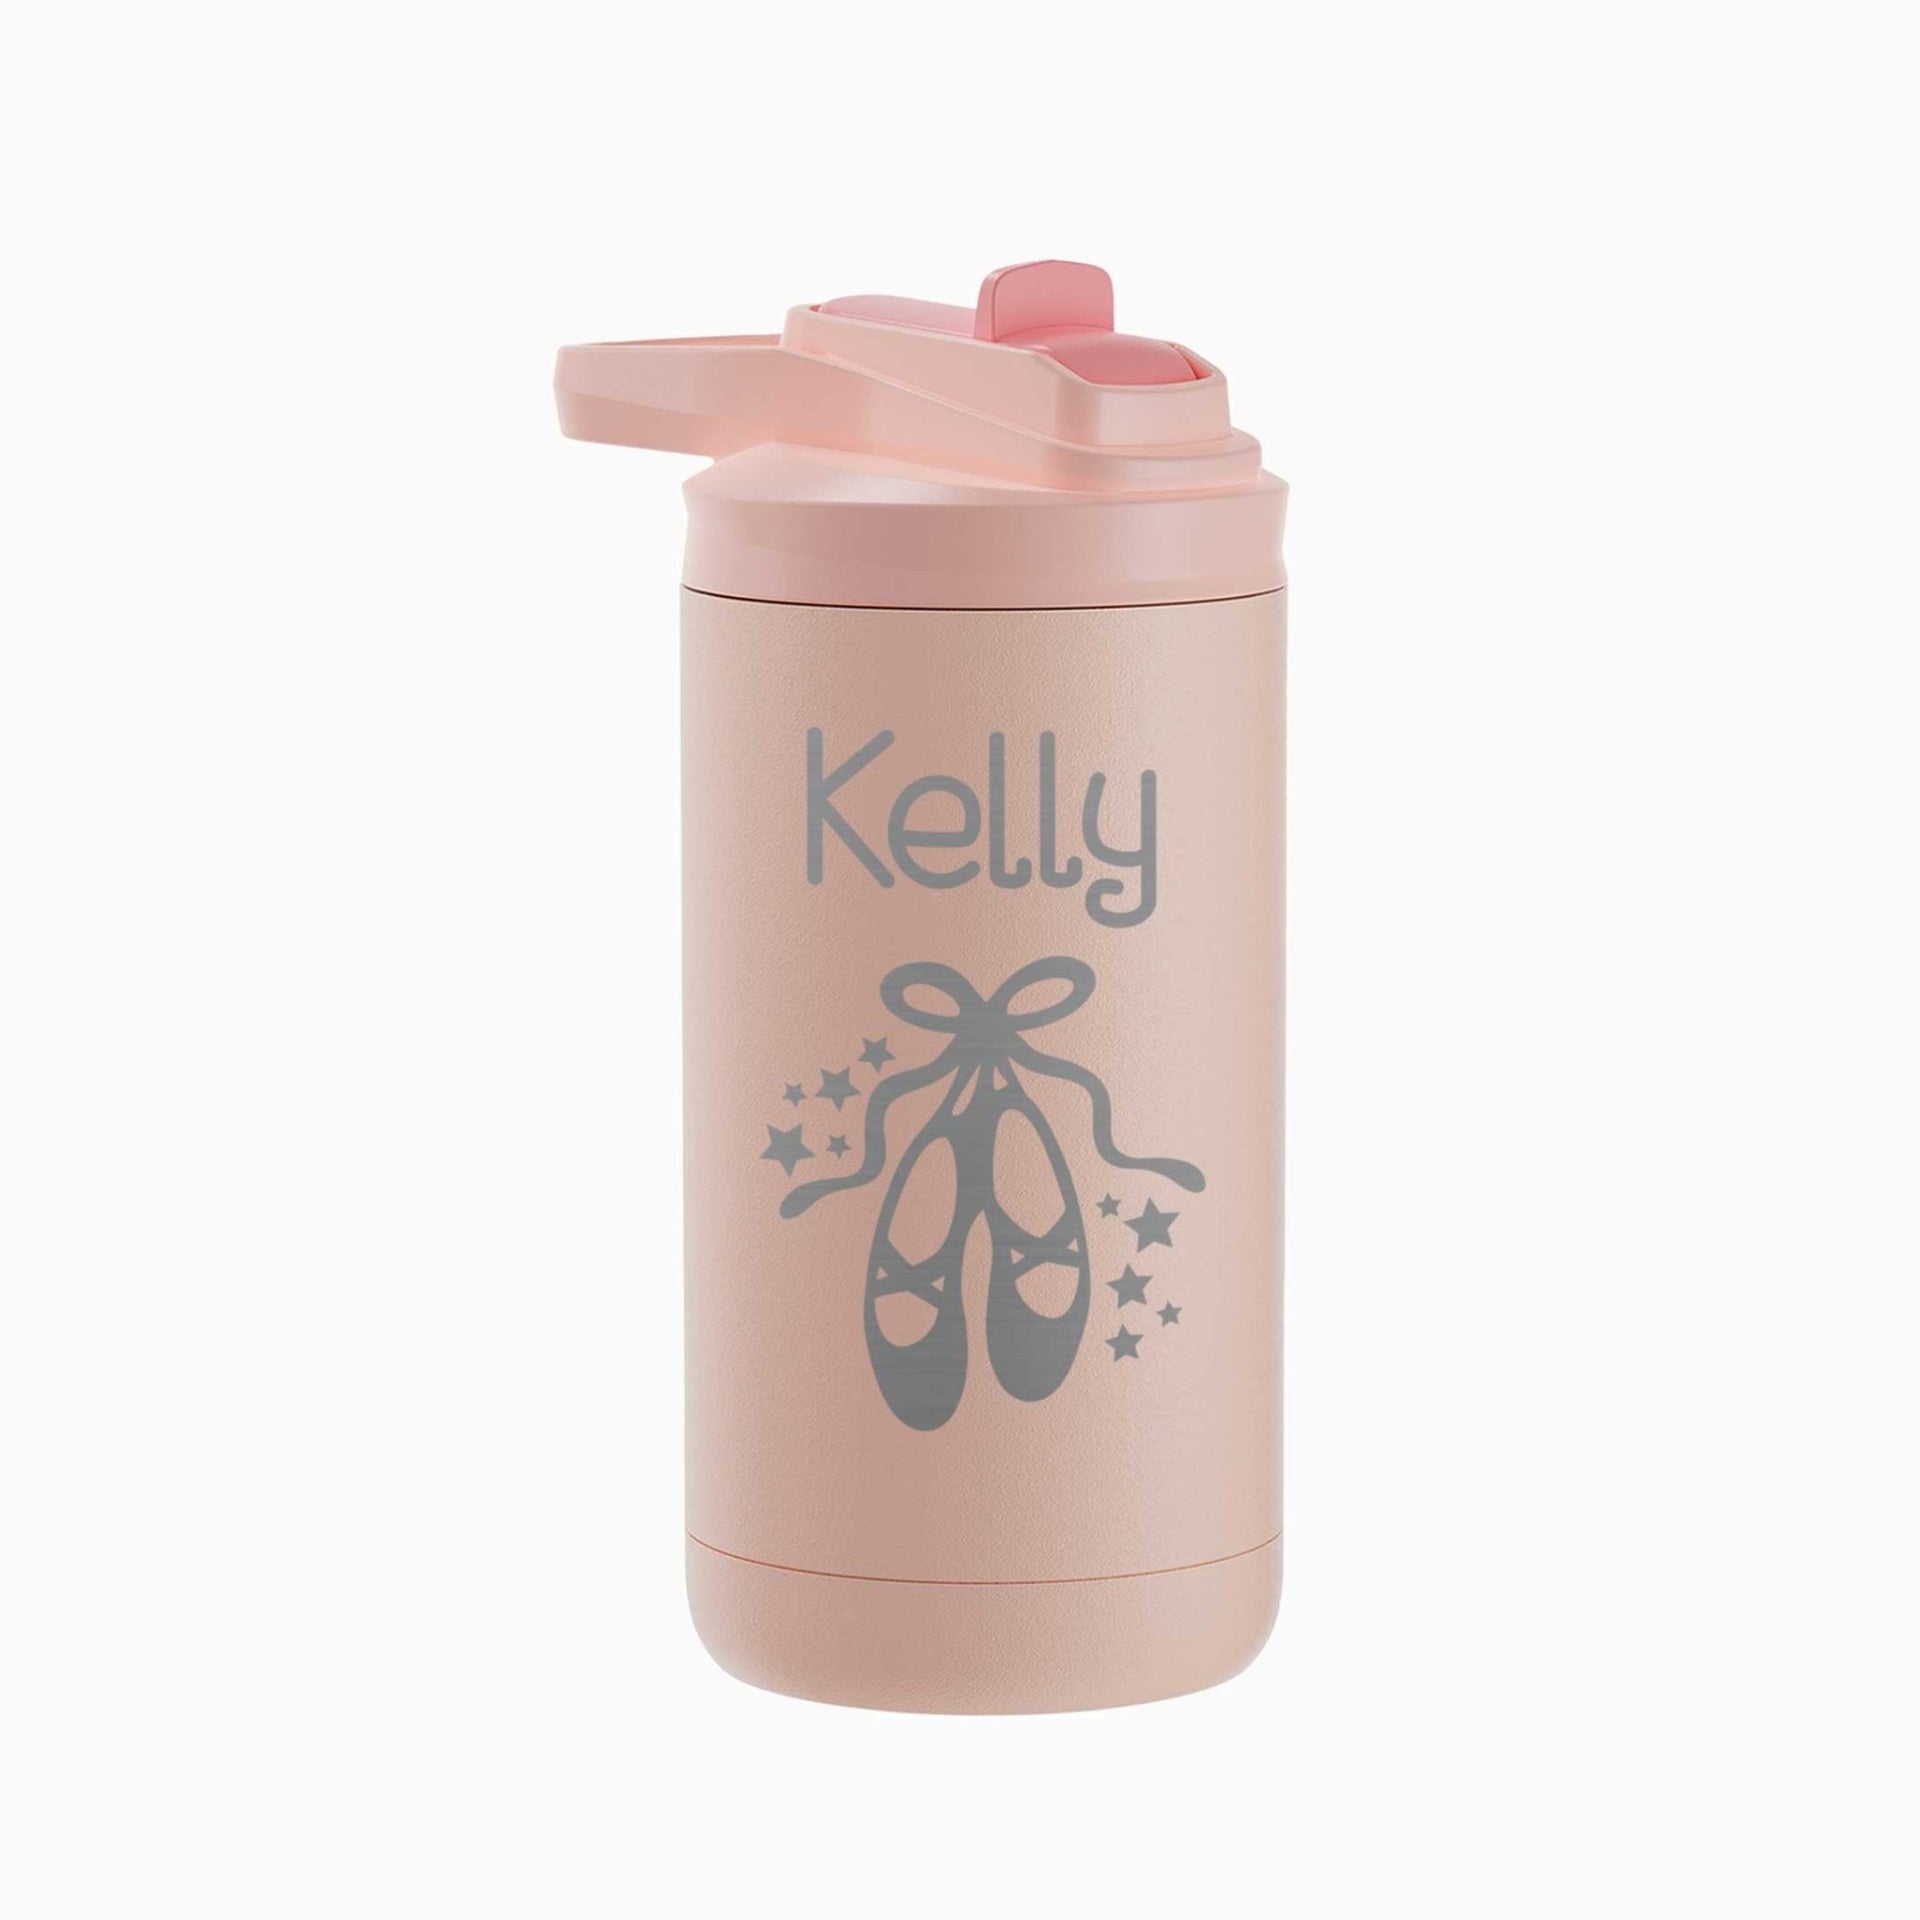 Personalized Kids Water Bottle 12 oz - Ballet and Dance - Mod Peach